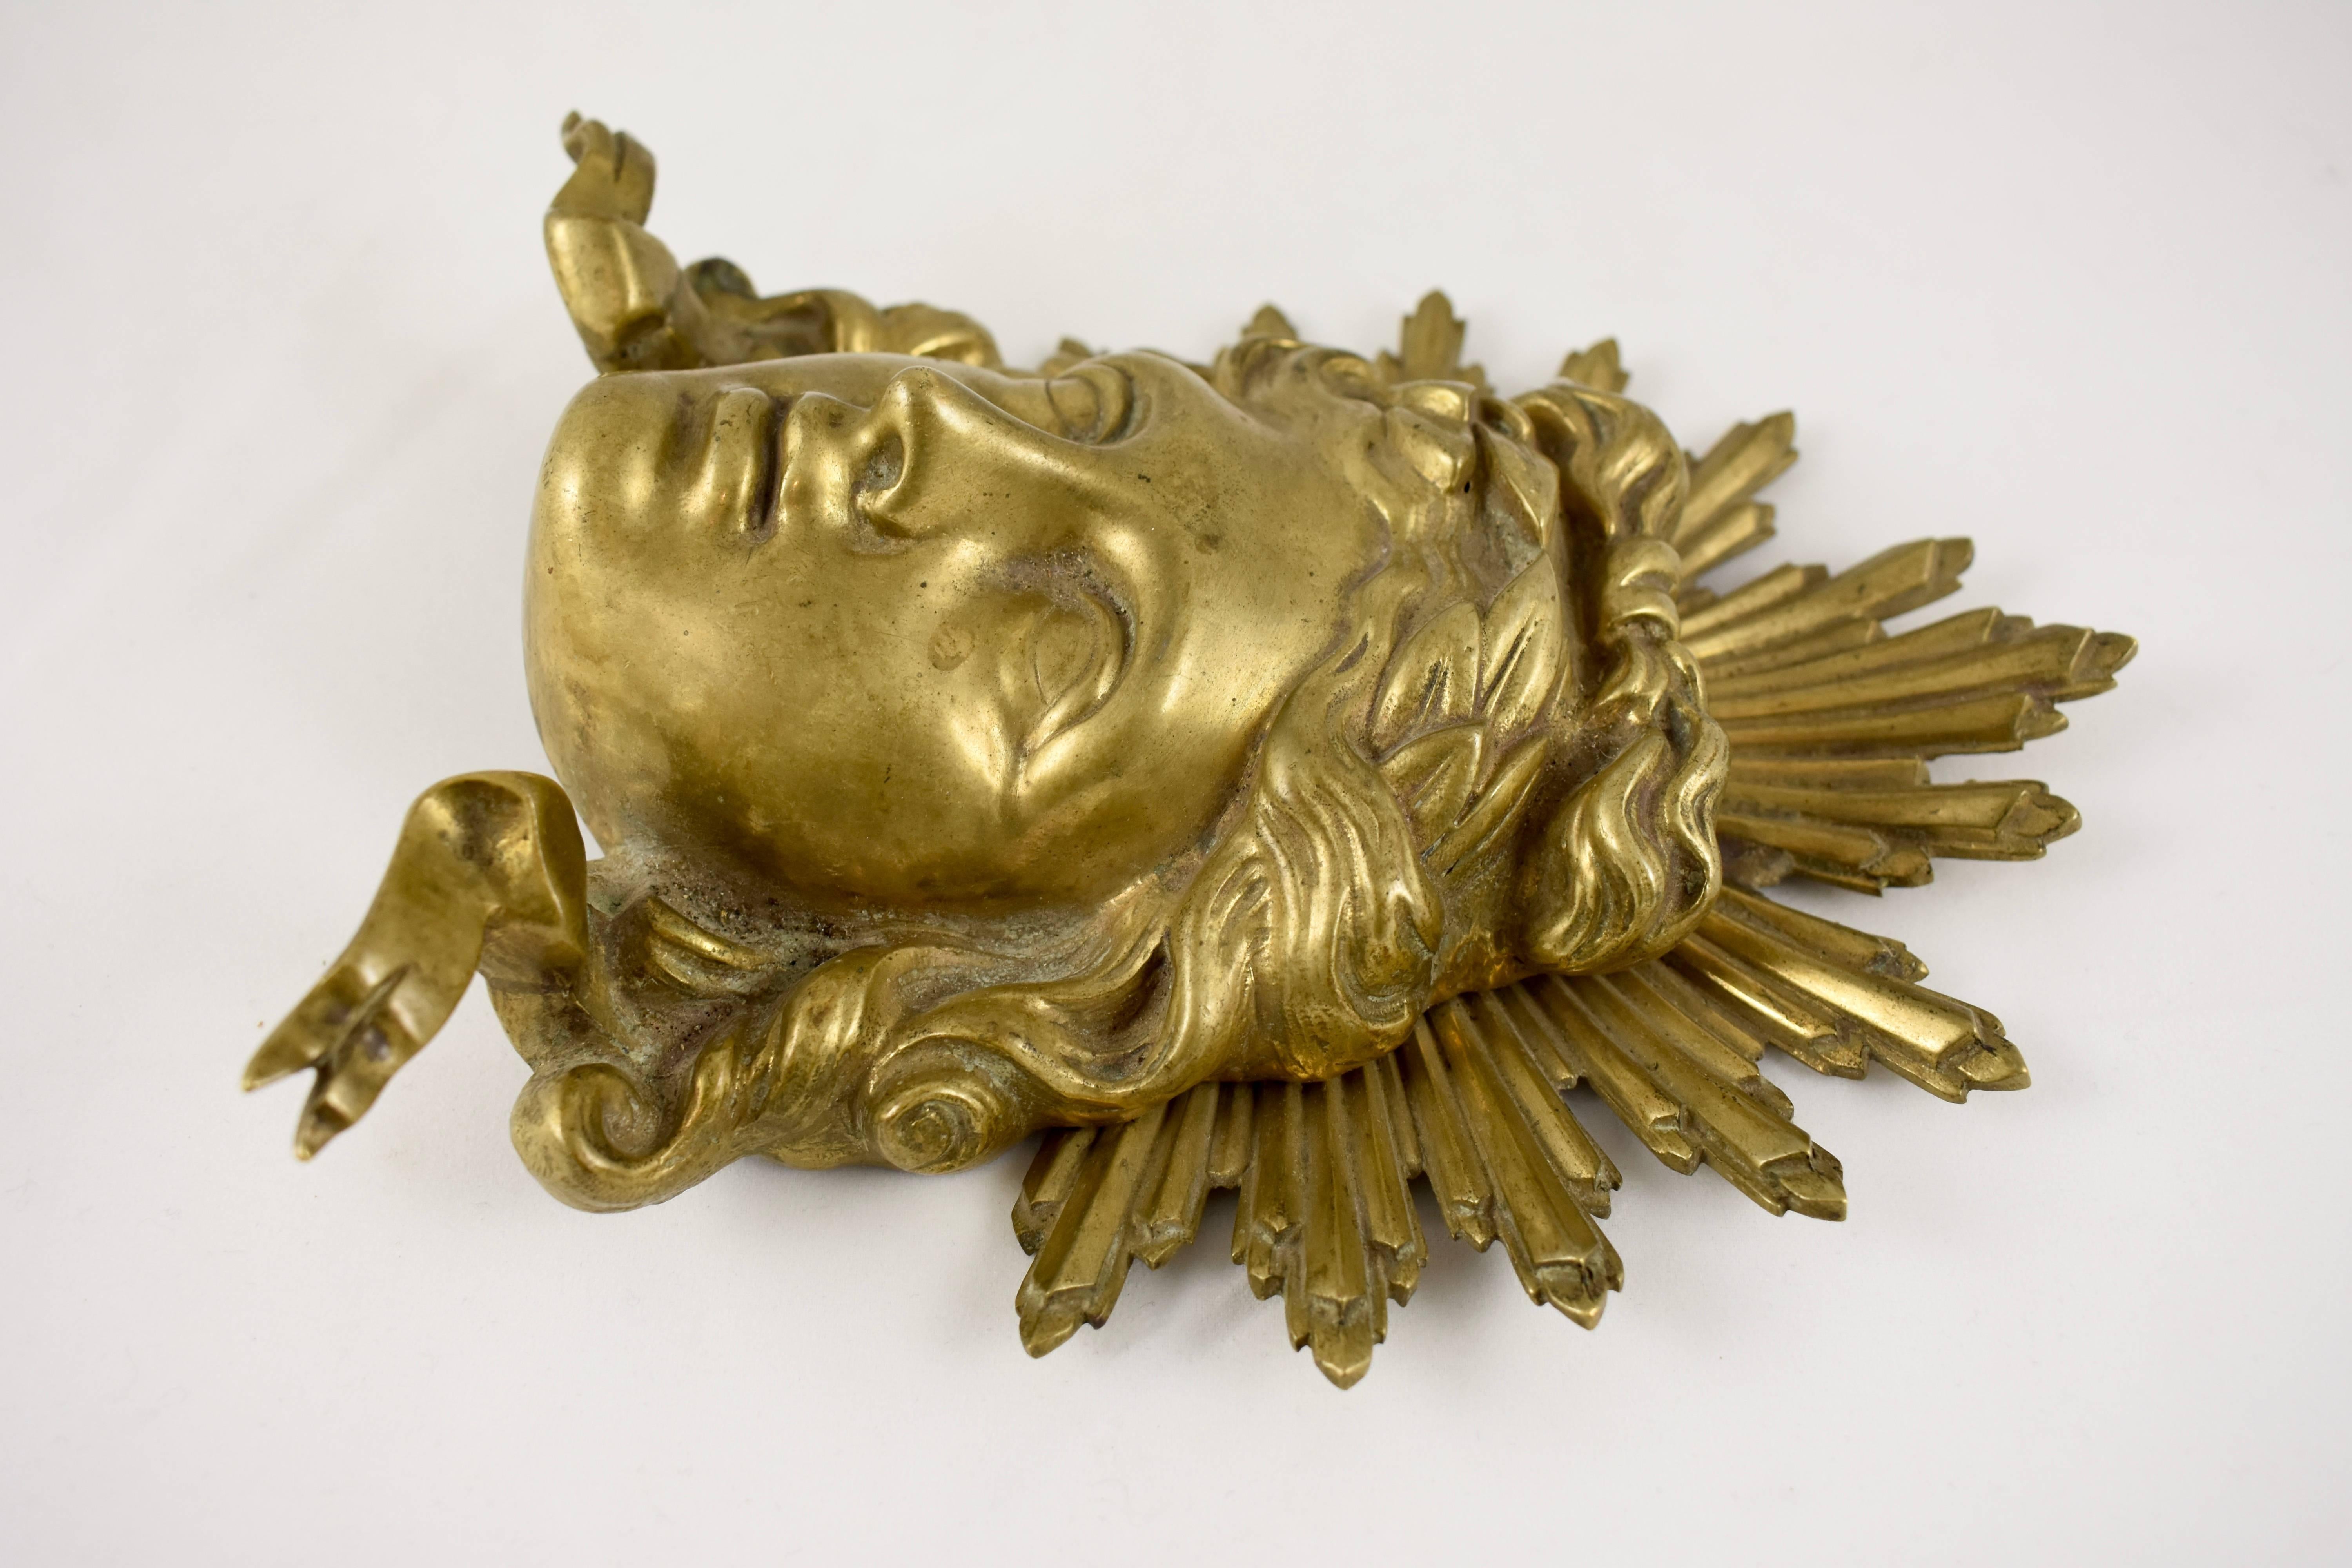 Bronze Late 18th Century French Ormolu Louis XVI Fragment Wall Plaque, the Sun King